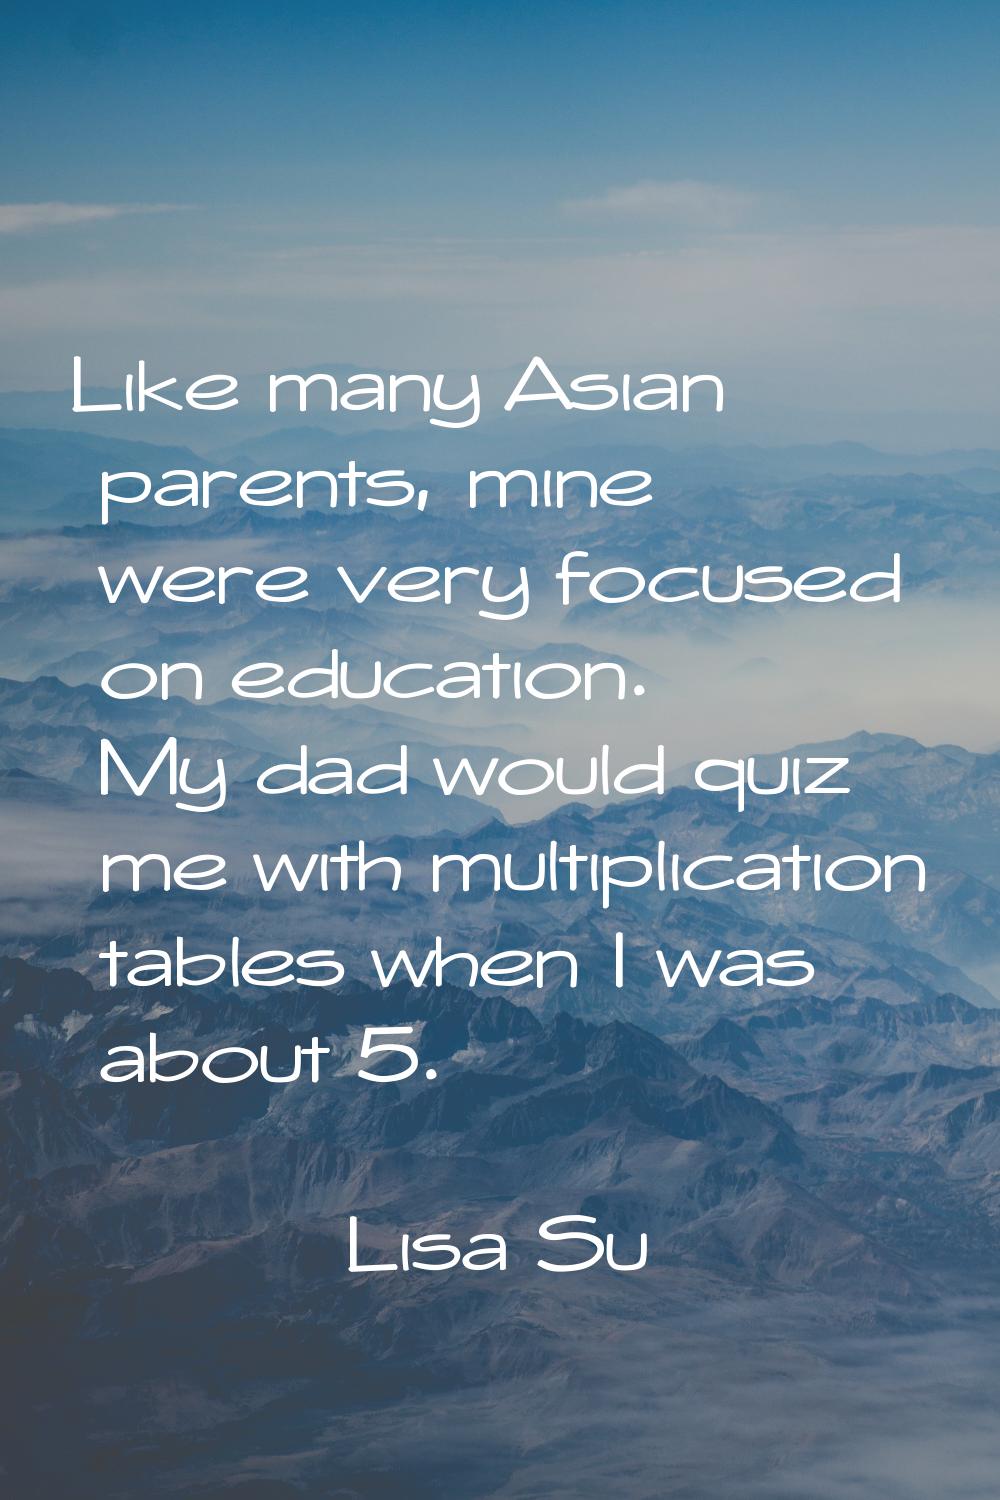 Like many Asian parents, mine were very focused on education. My dad would quiz me with multiplicat